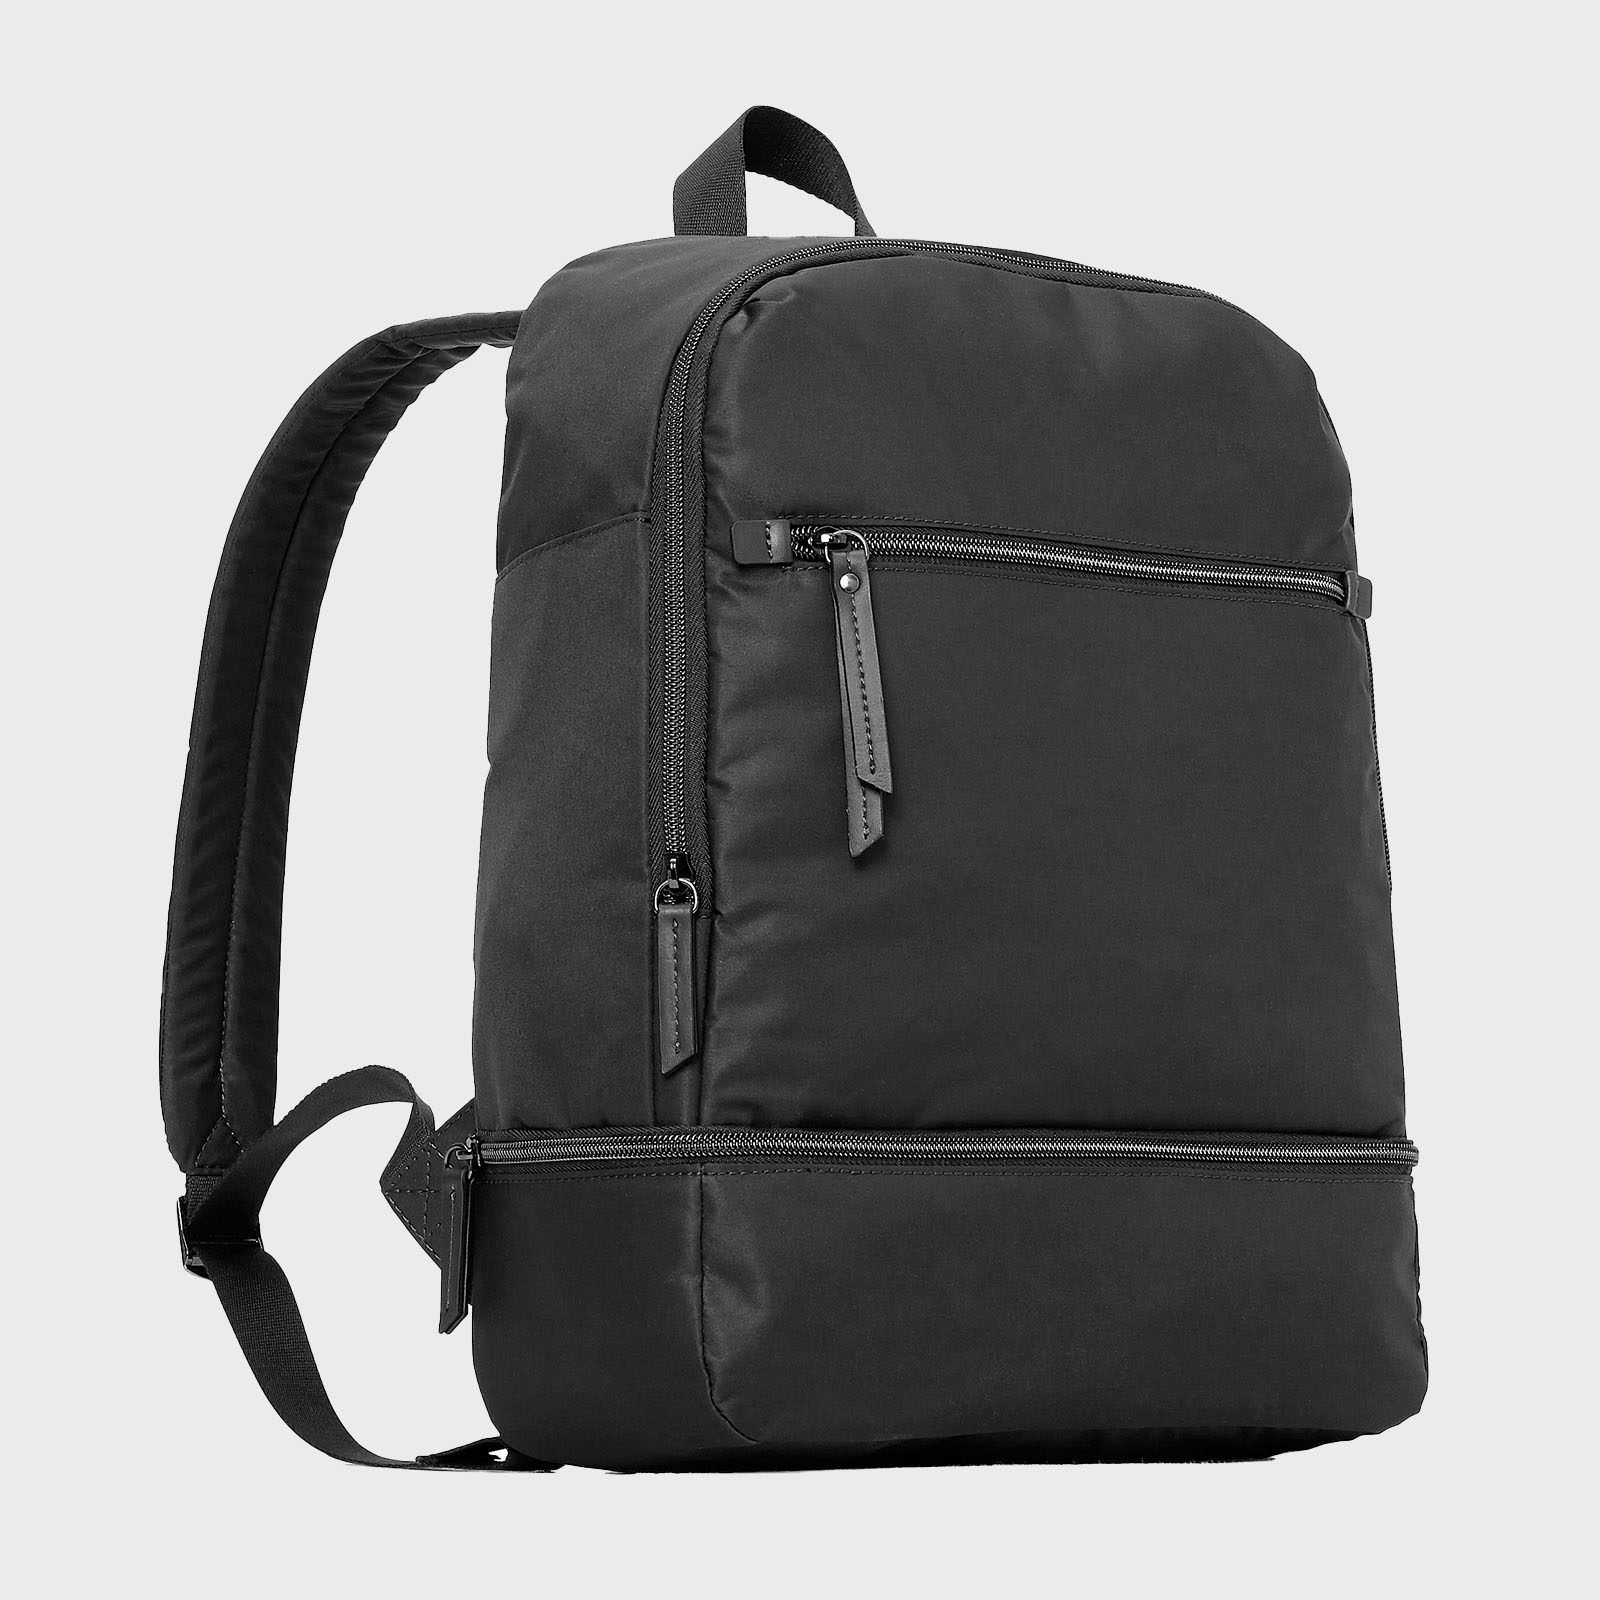 17 Best Backpacks for Every Day 2022 — School, Commuting, Travel